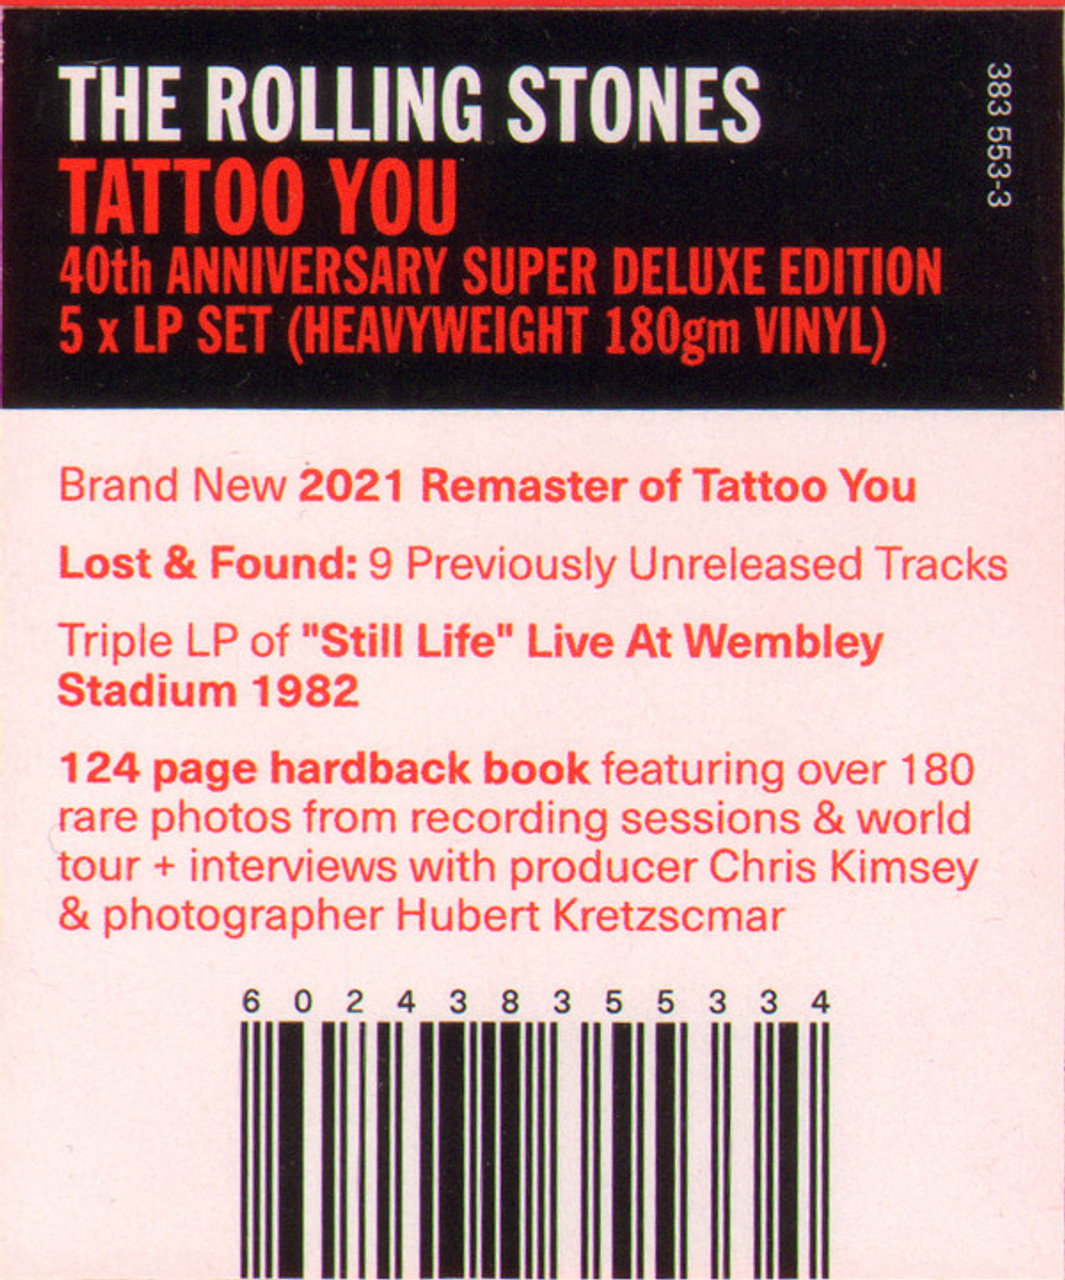 Tattoo You - Rolling Stones (#602438355334) - Omega Music